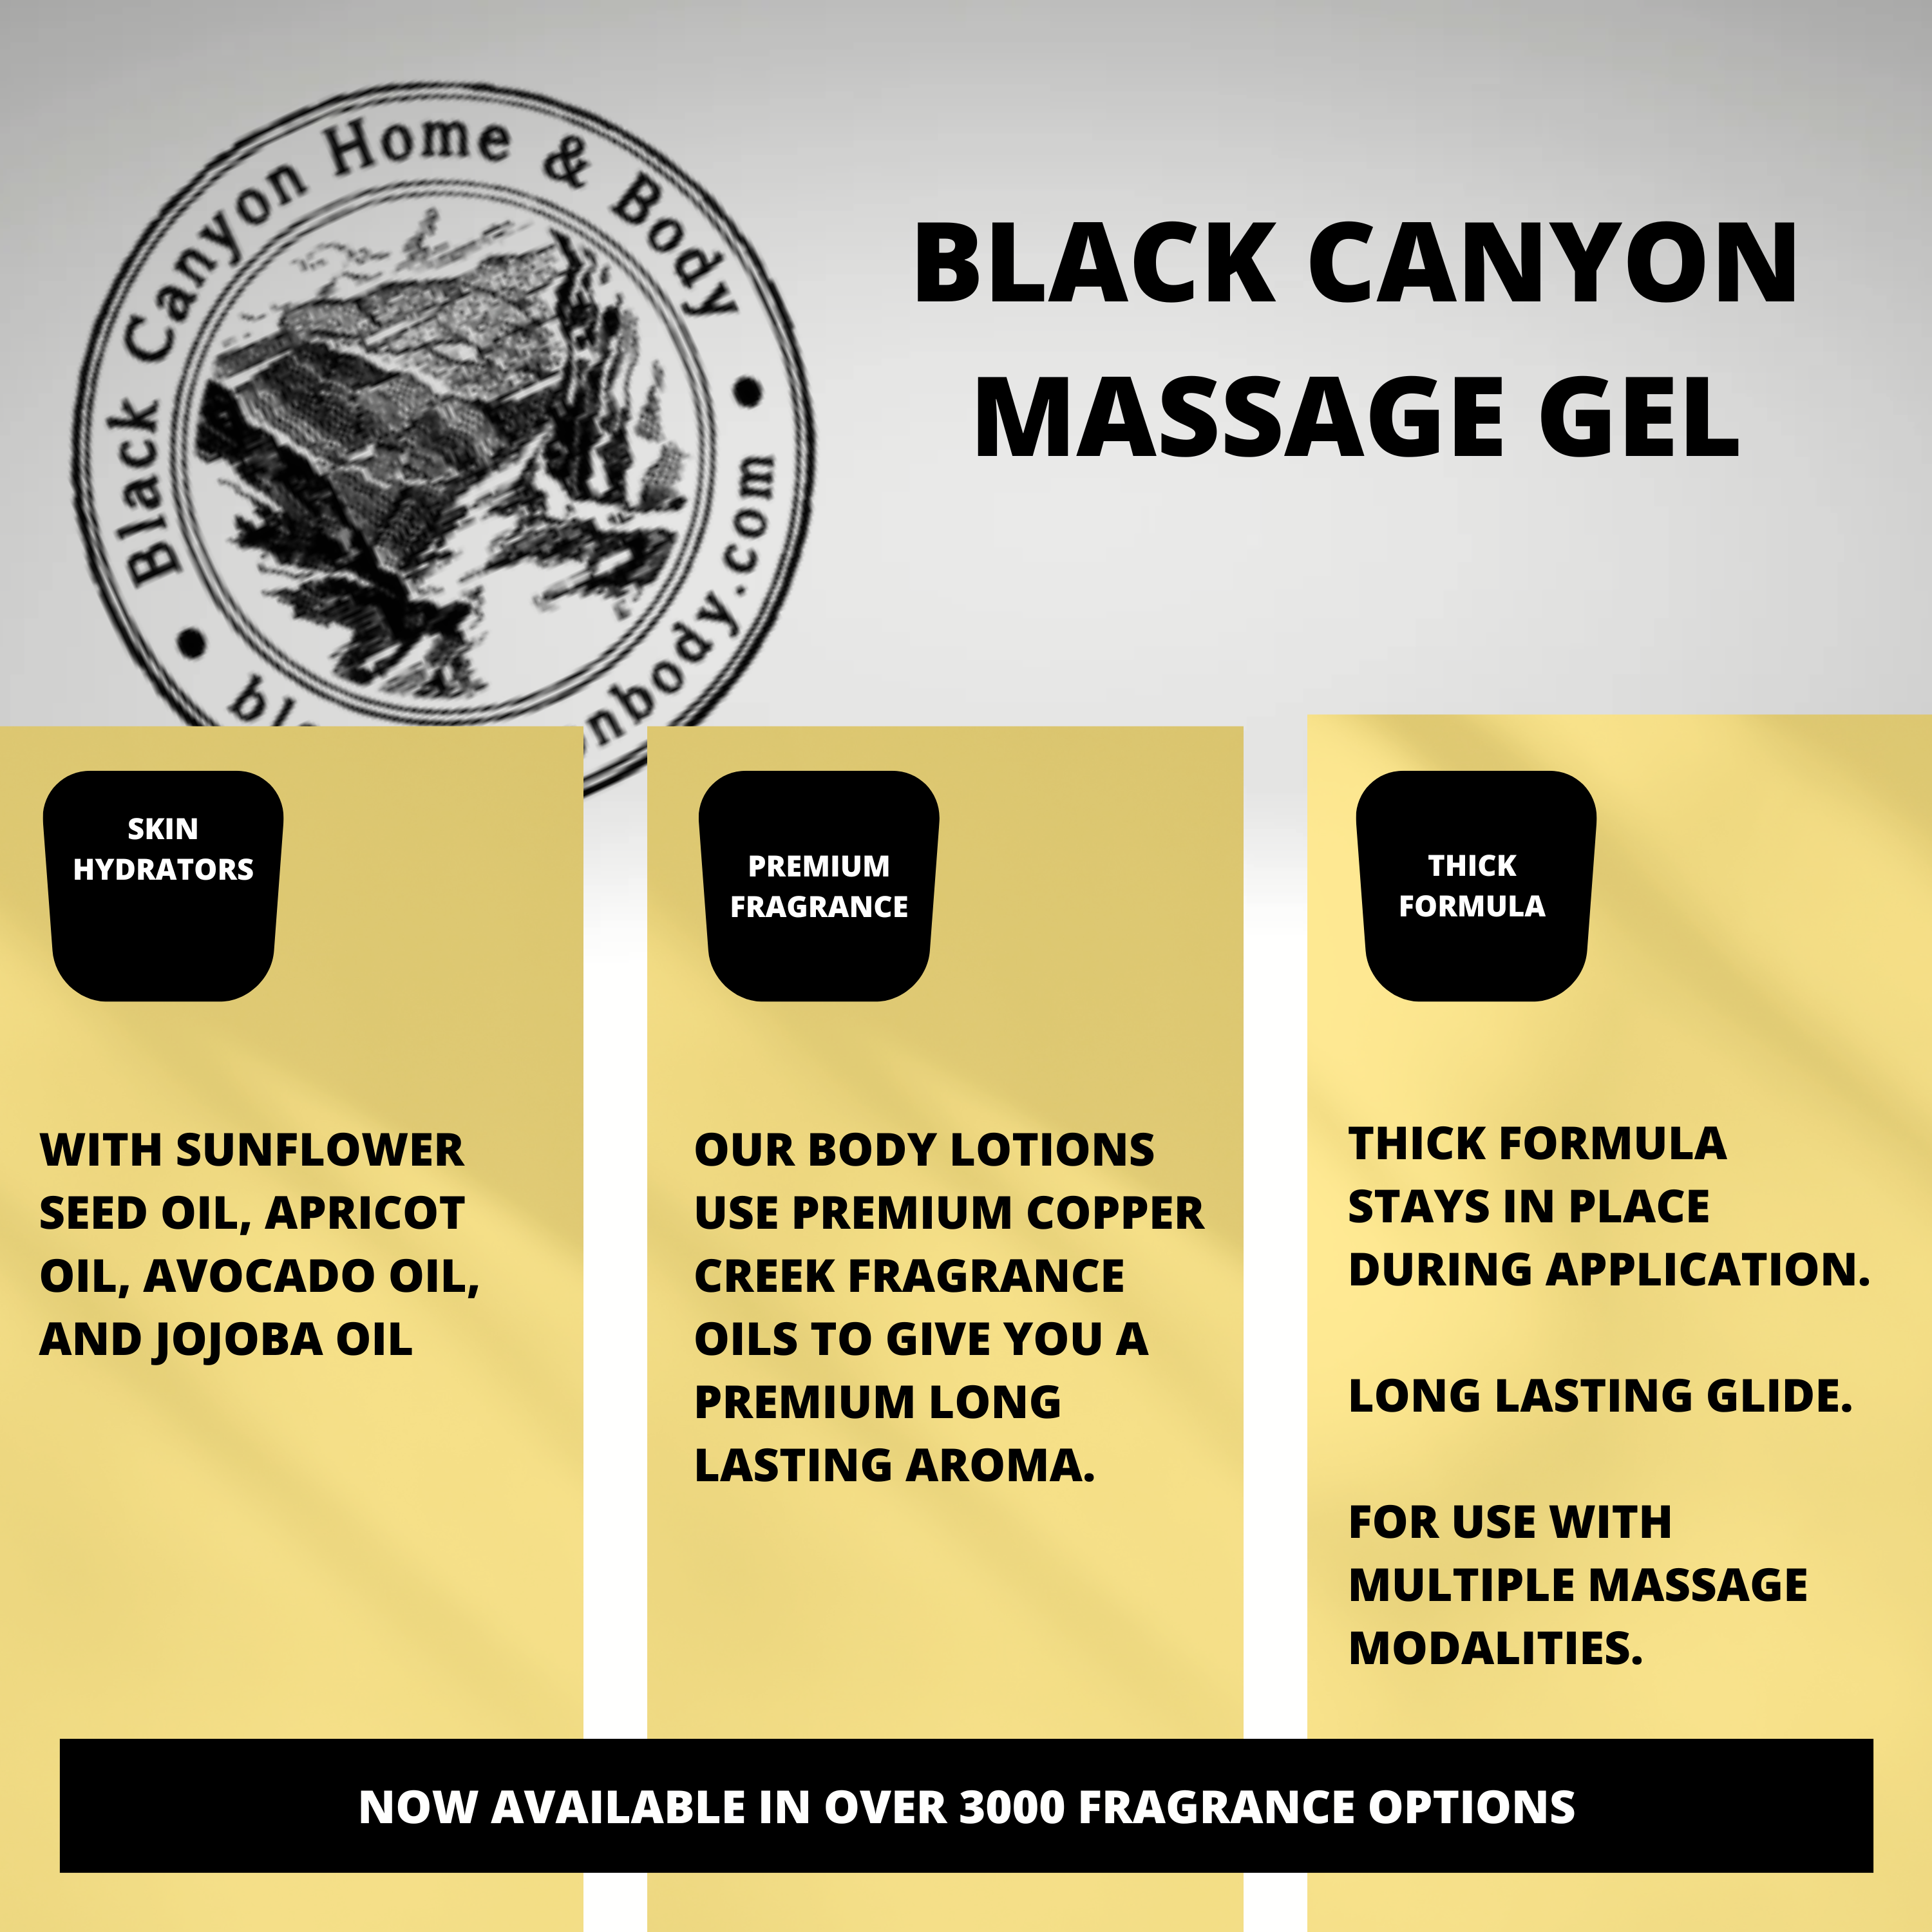 Black Canyon Gingerbread Spiced Cookie Scented Massage Gel